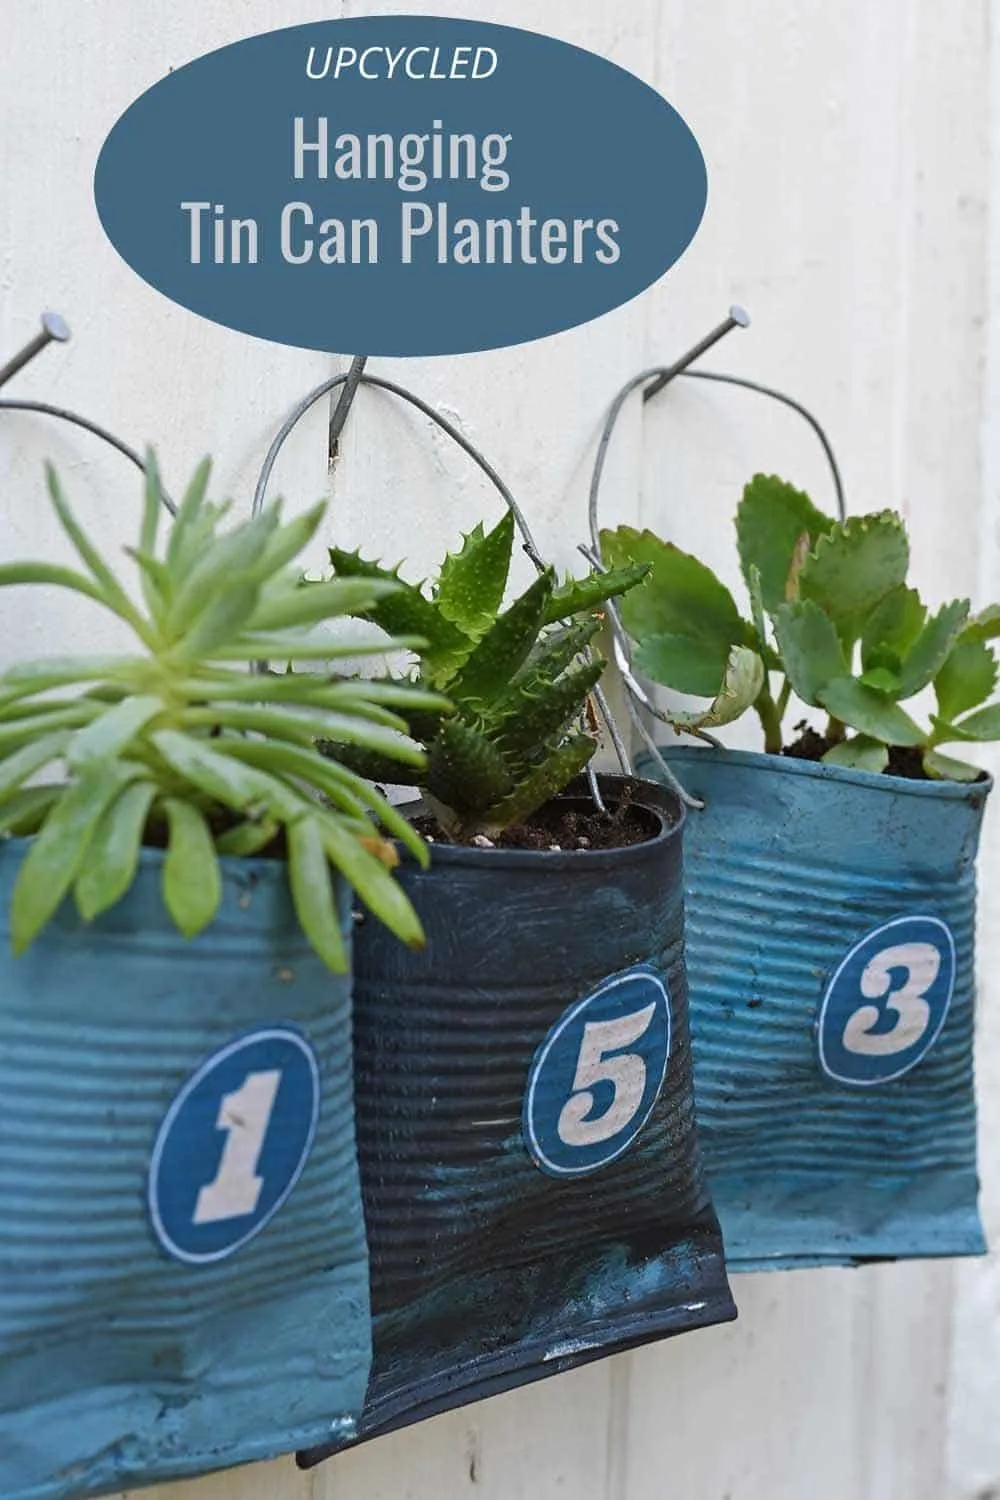 Upcycled hanging succulent planters